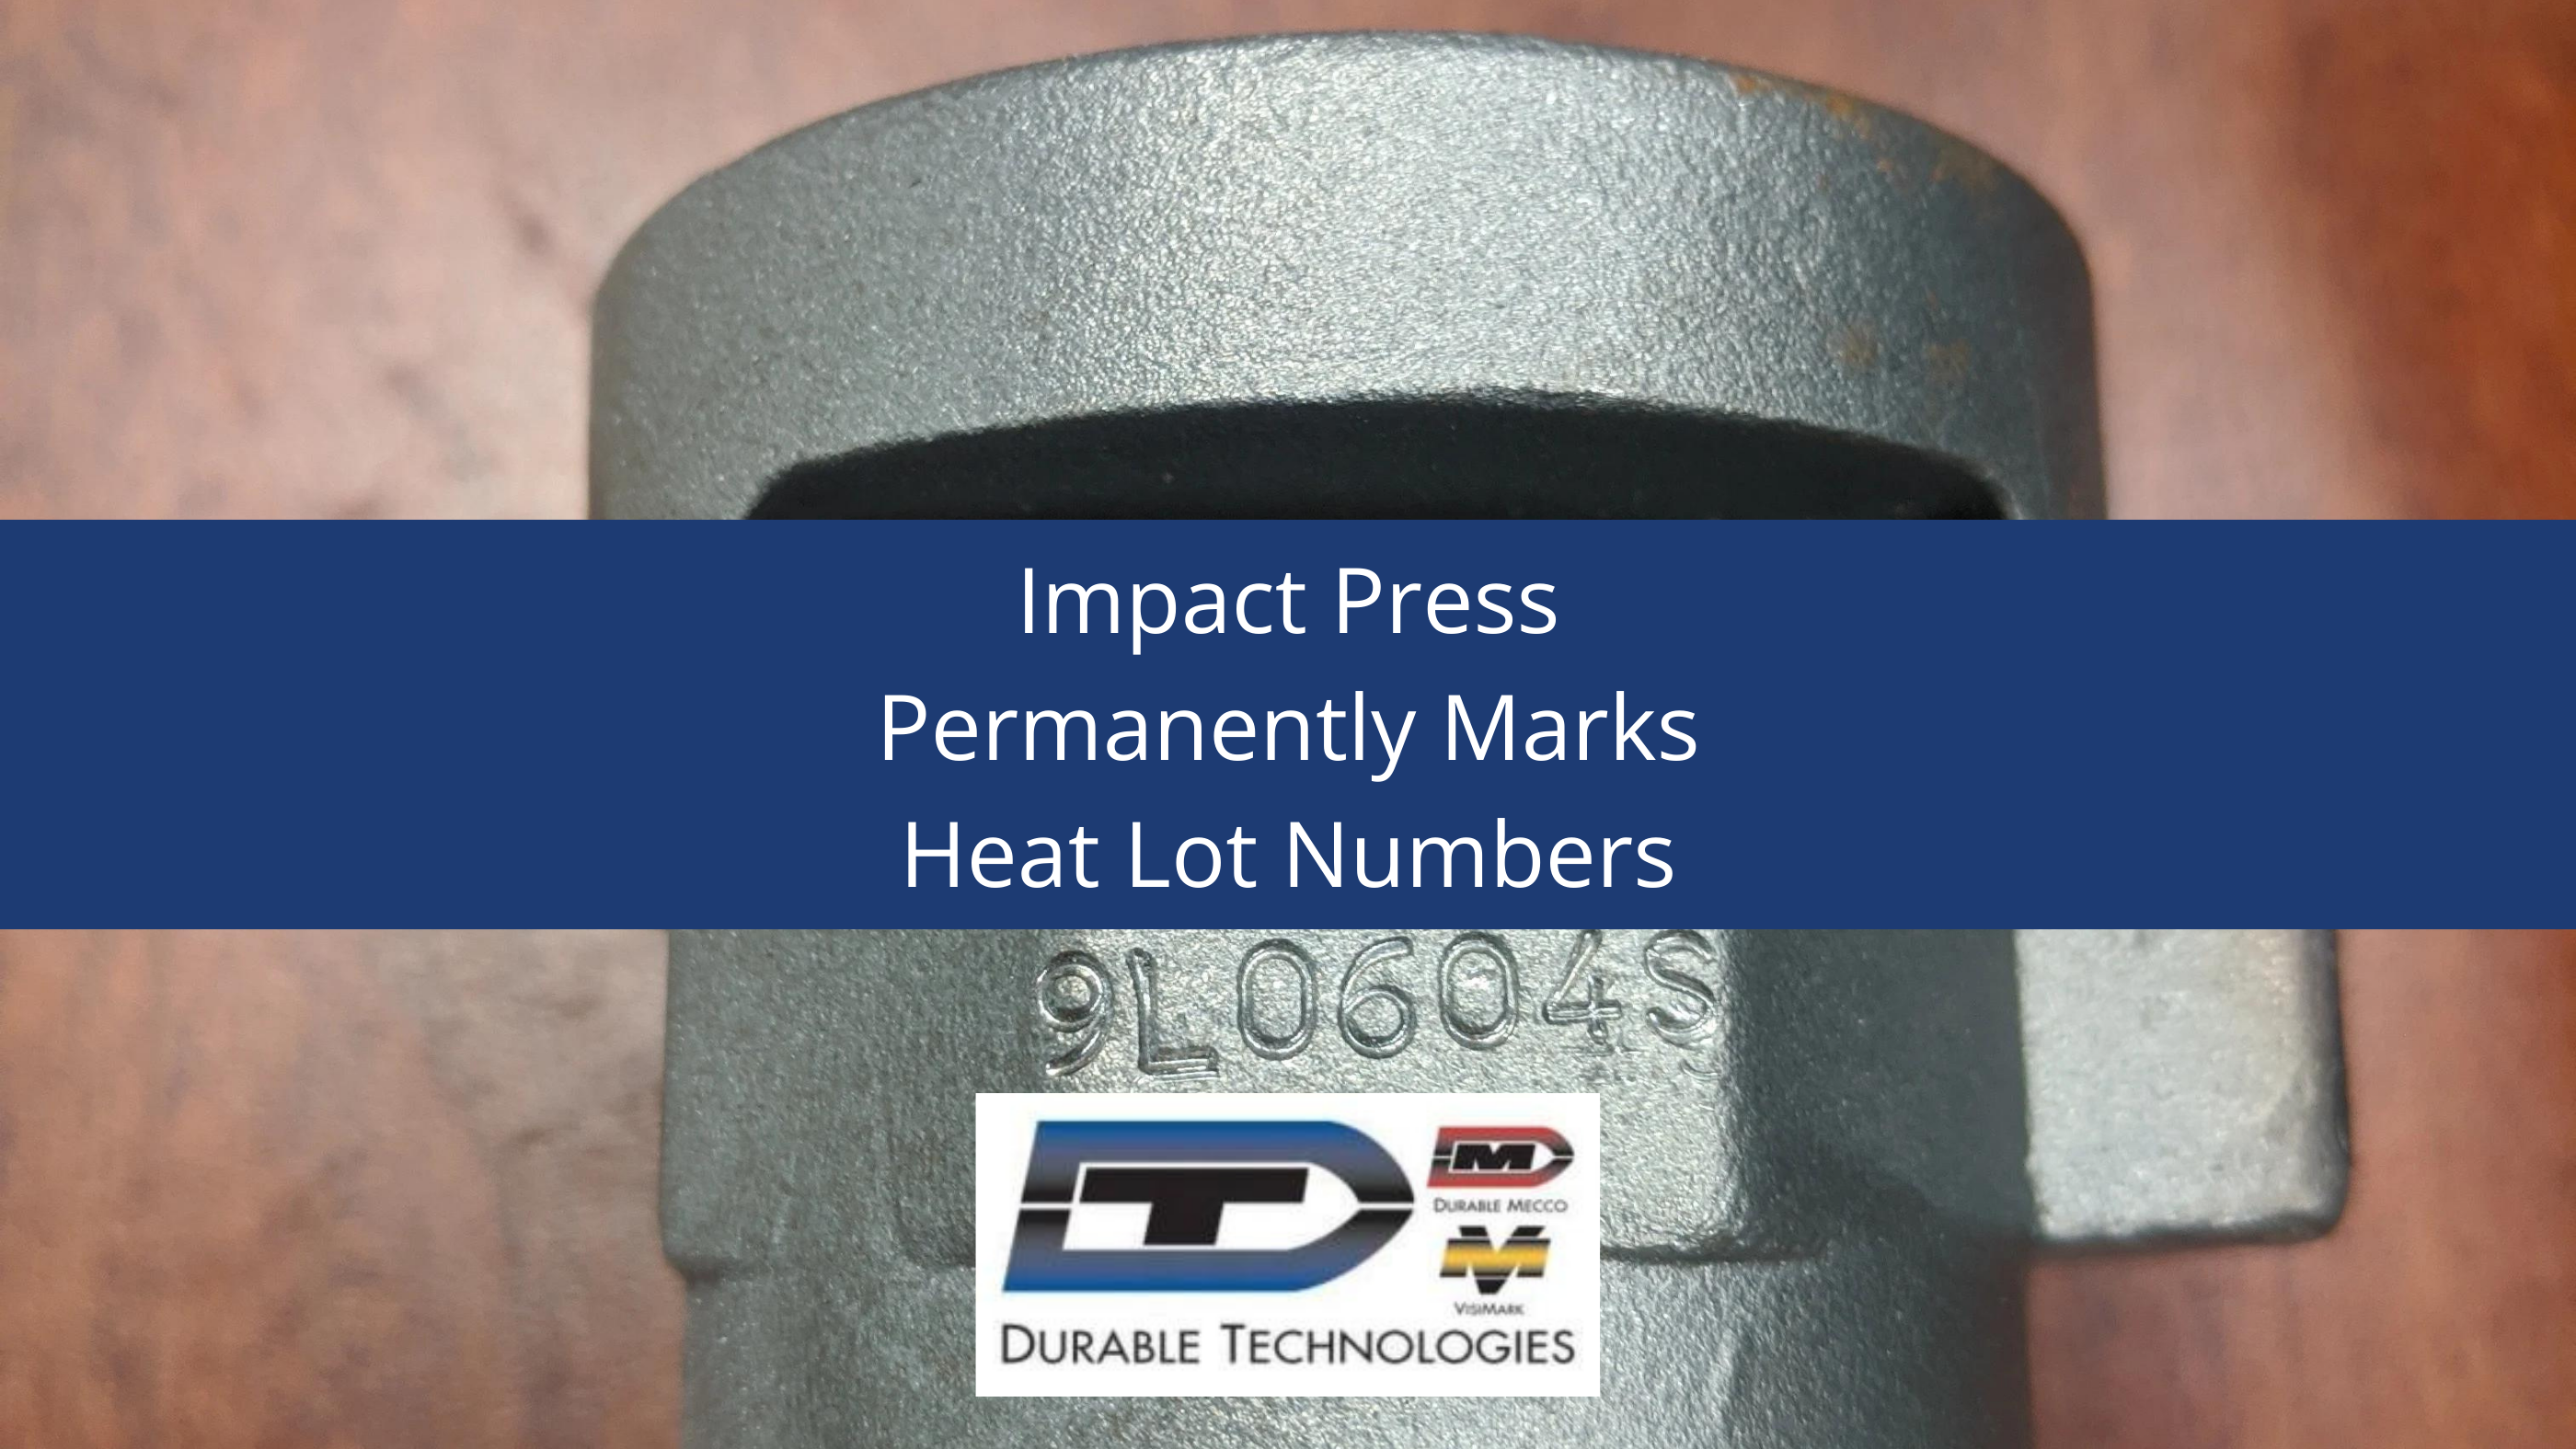 Impact Press Permanently Marks Heat Lot Numbers